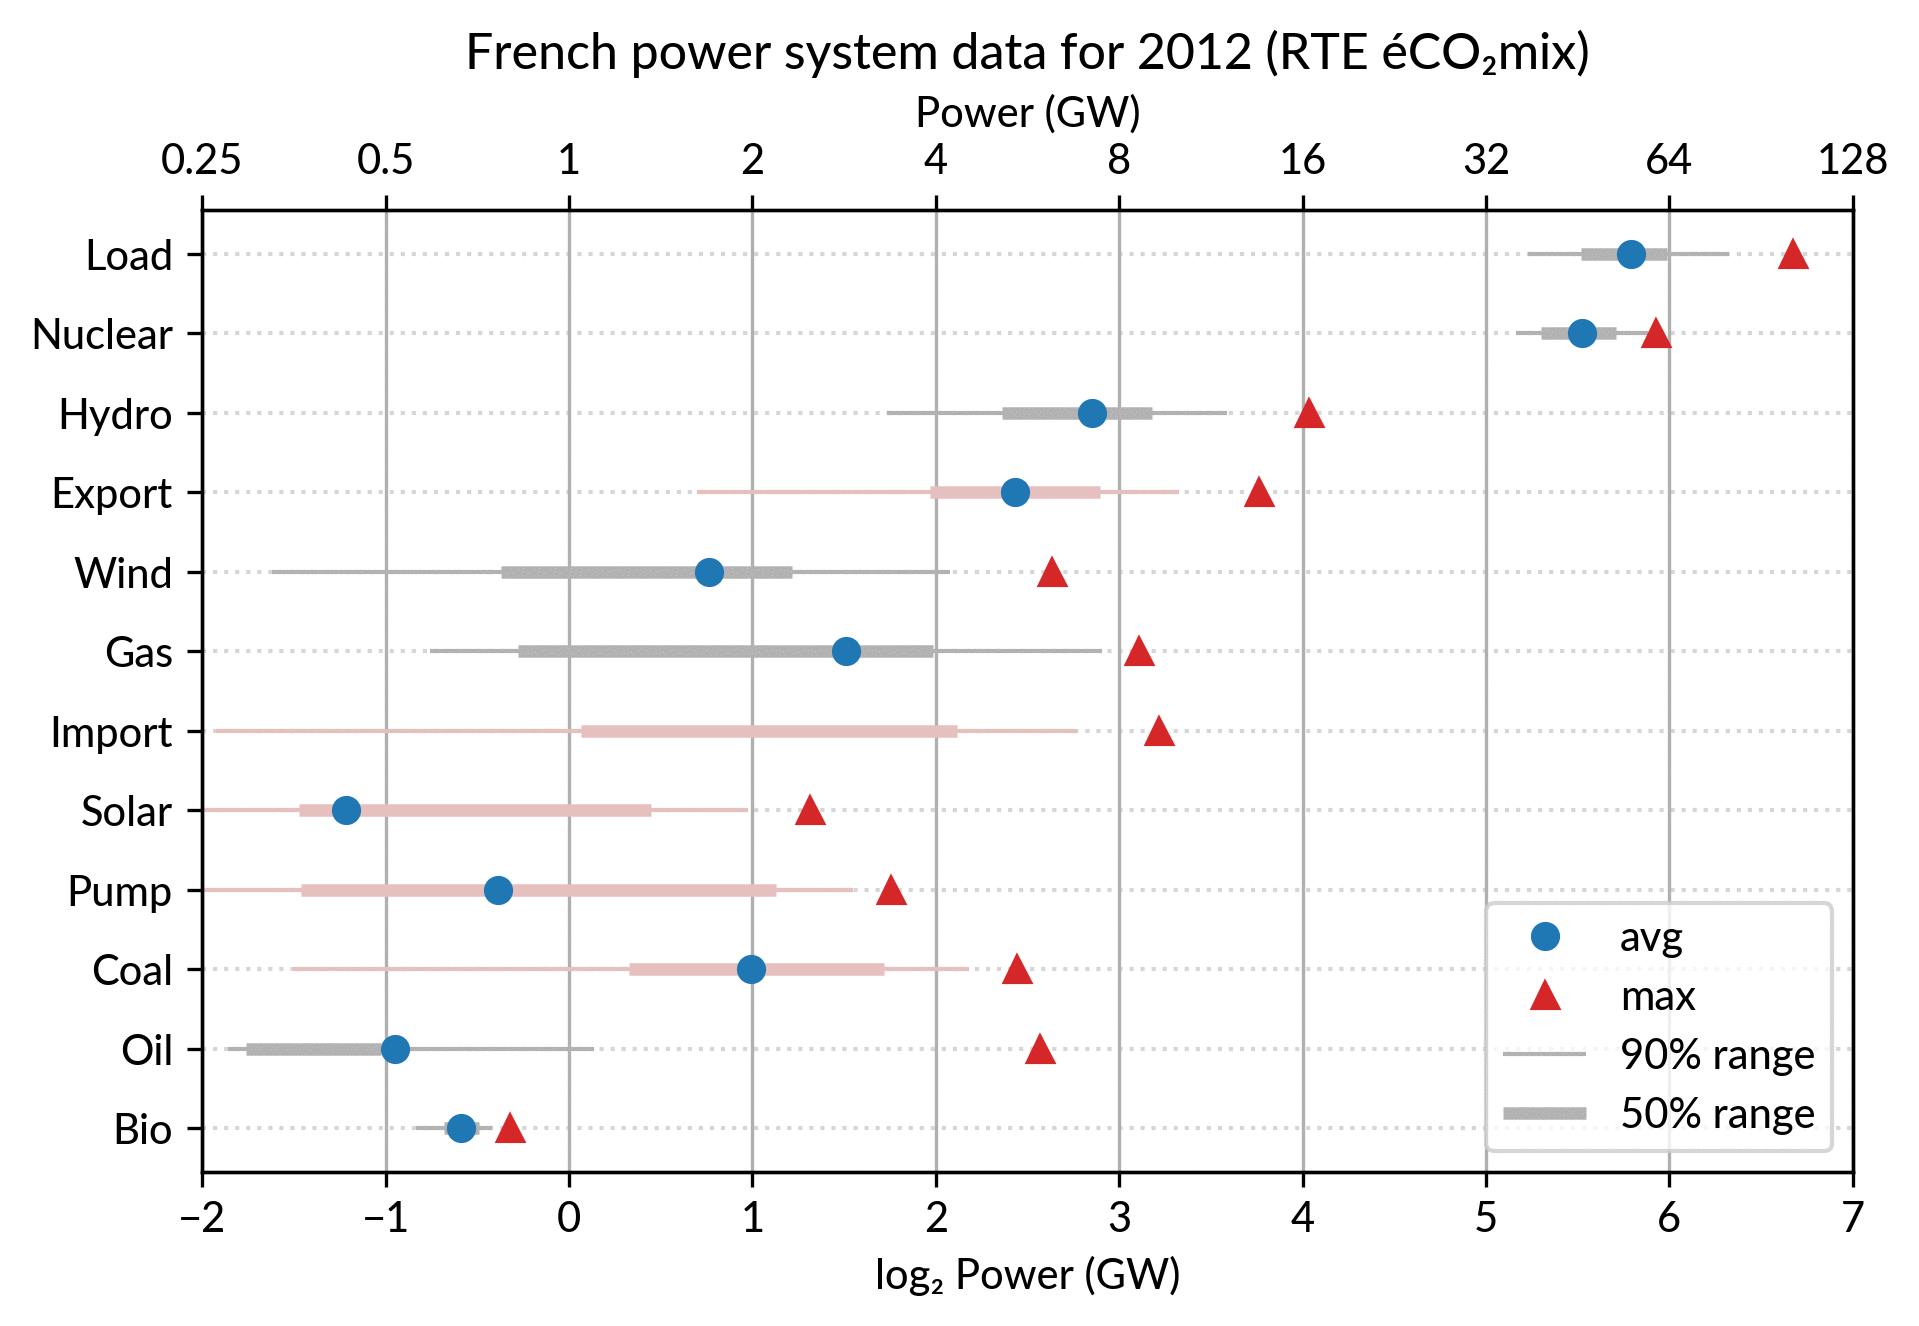 GIF animation of the French electricity dot plot from 2012 to 2018